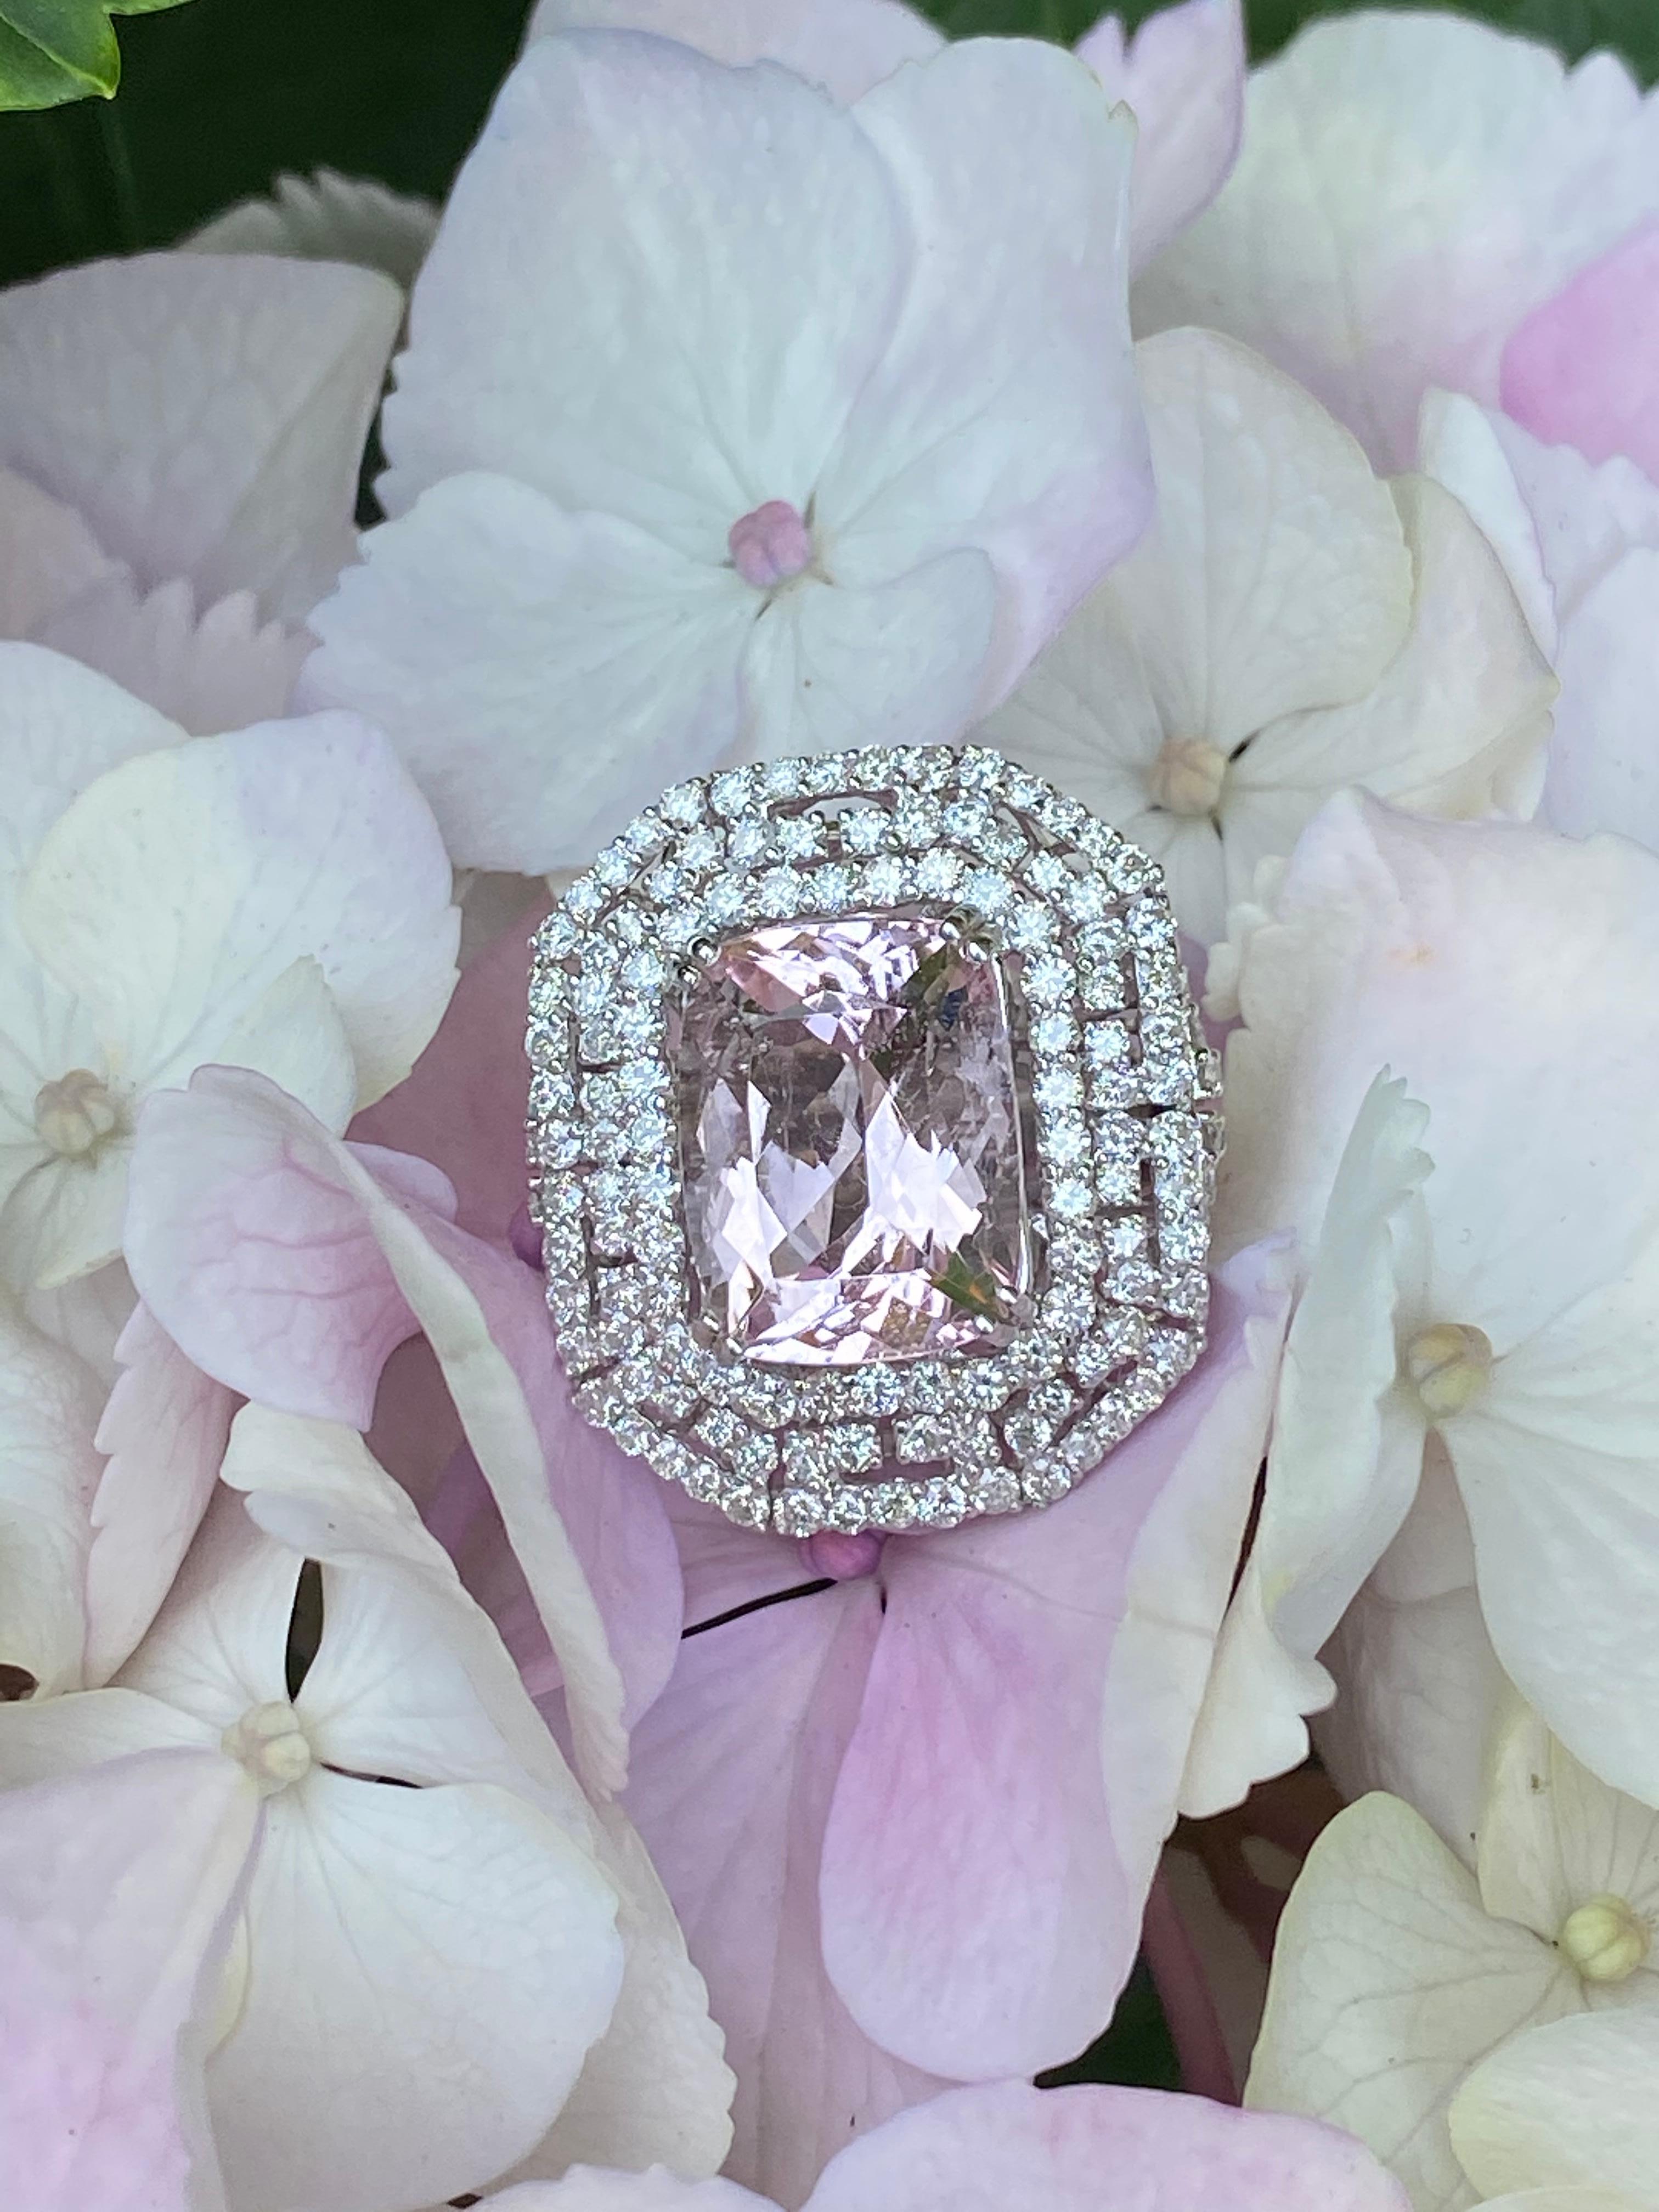 Magnificent 9.01 carat round cornered rectangular modified brilliant cut pink morganite and diamond ring is talon prong set above a mesmerizing three layer octagonal halo of round brilliant diamonds set in a repetitive pattern openwork design